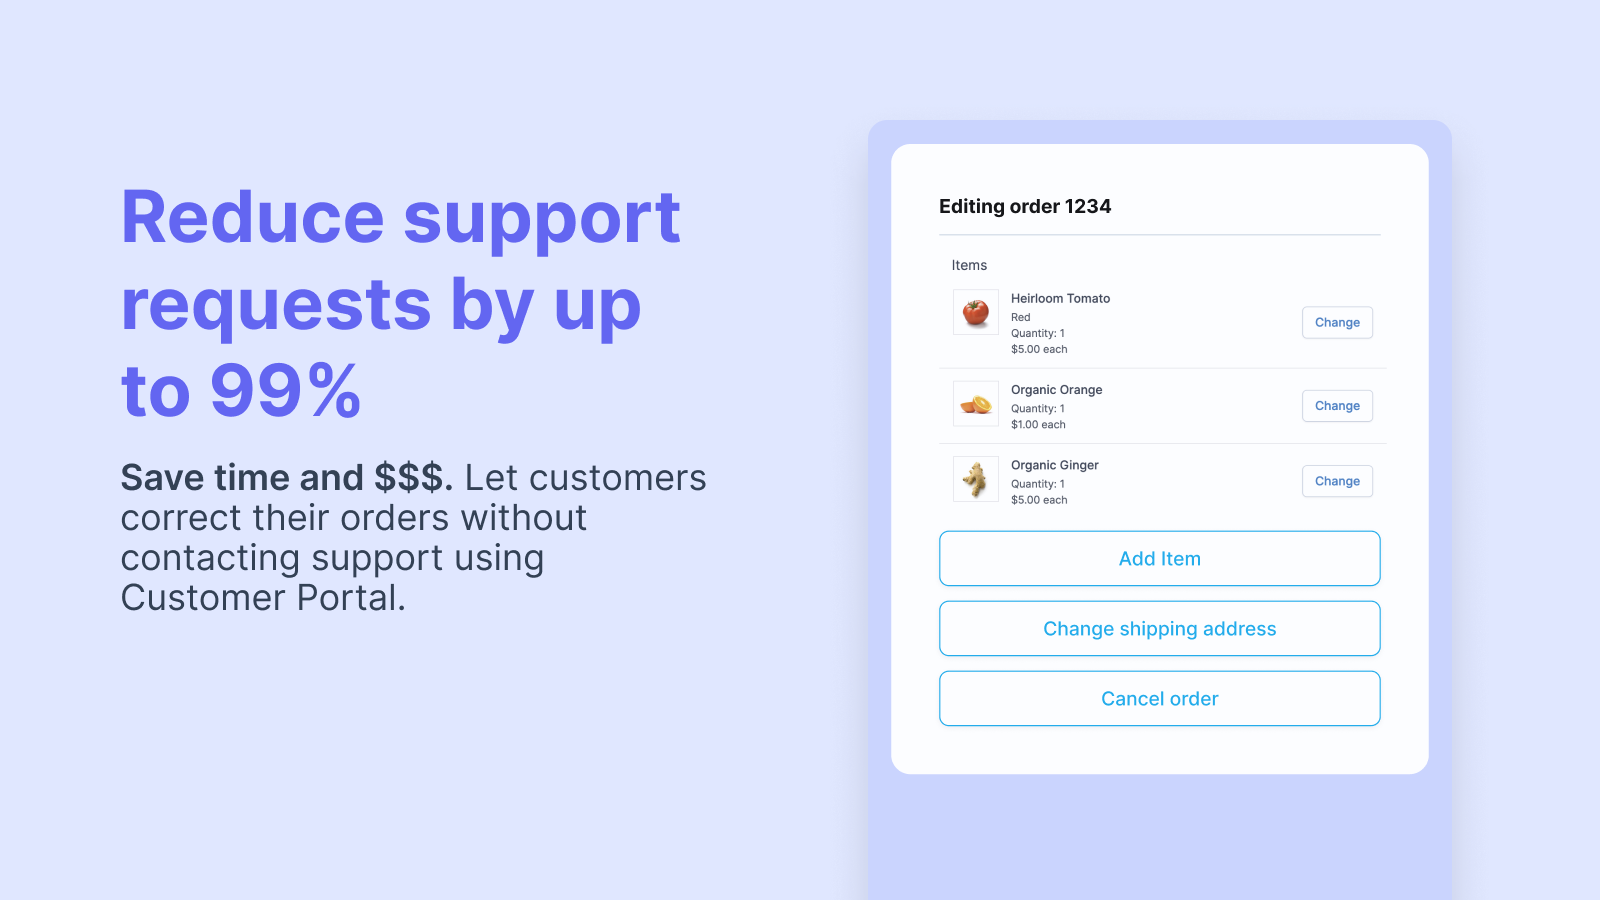 Let customers make changes to orders without contacting support.